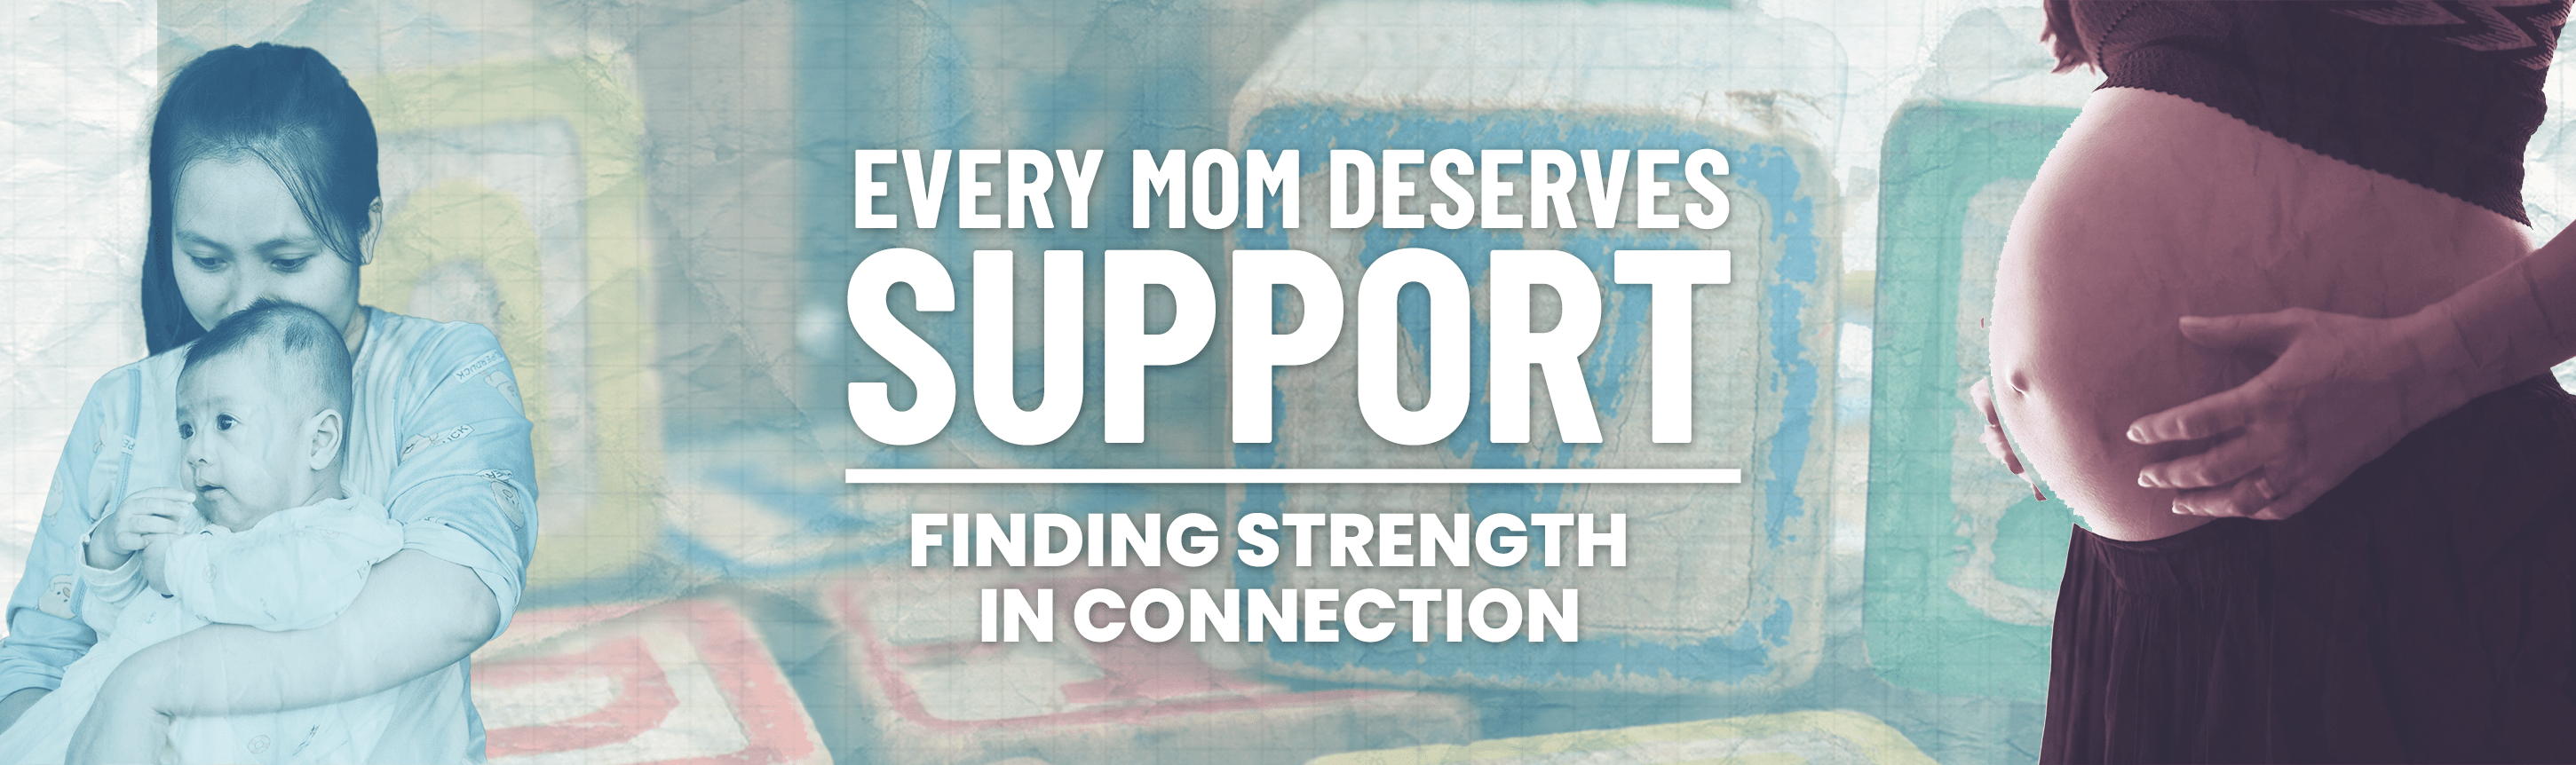 every mom deserves support